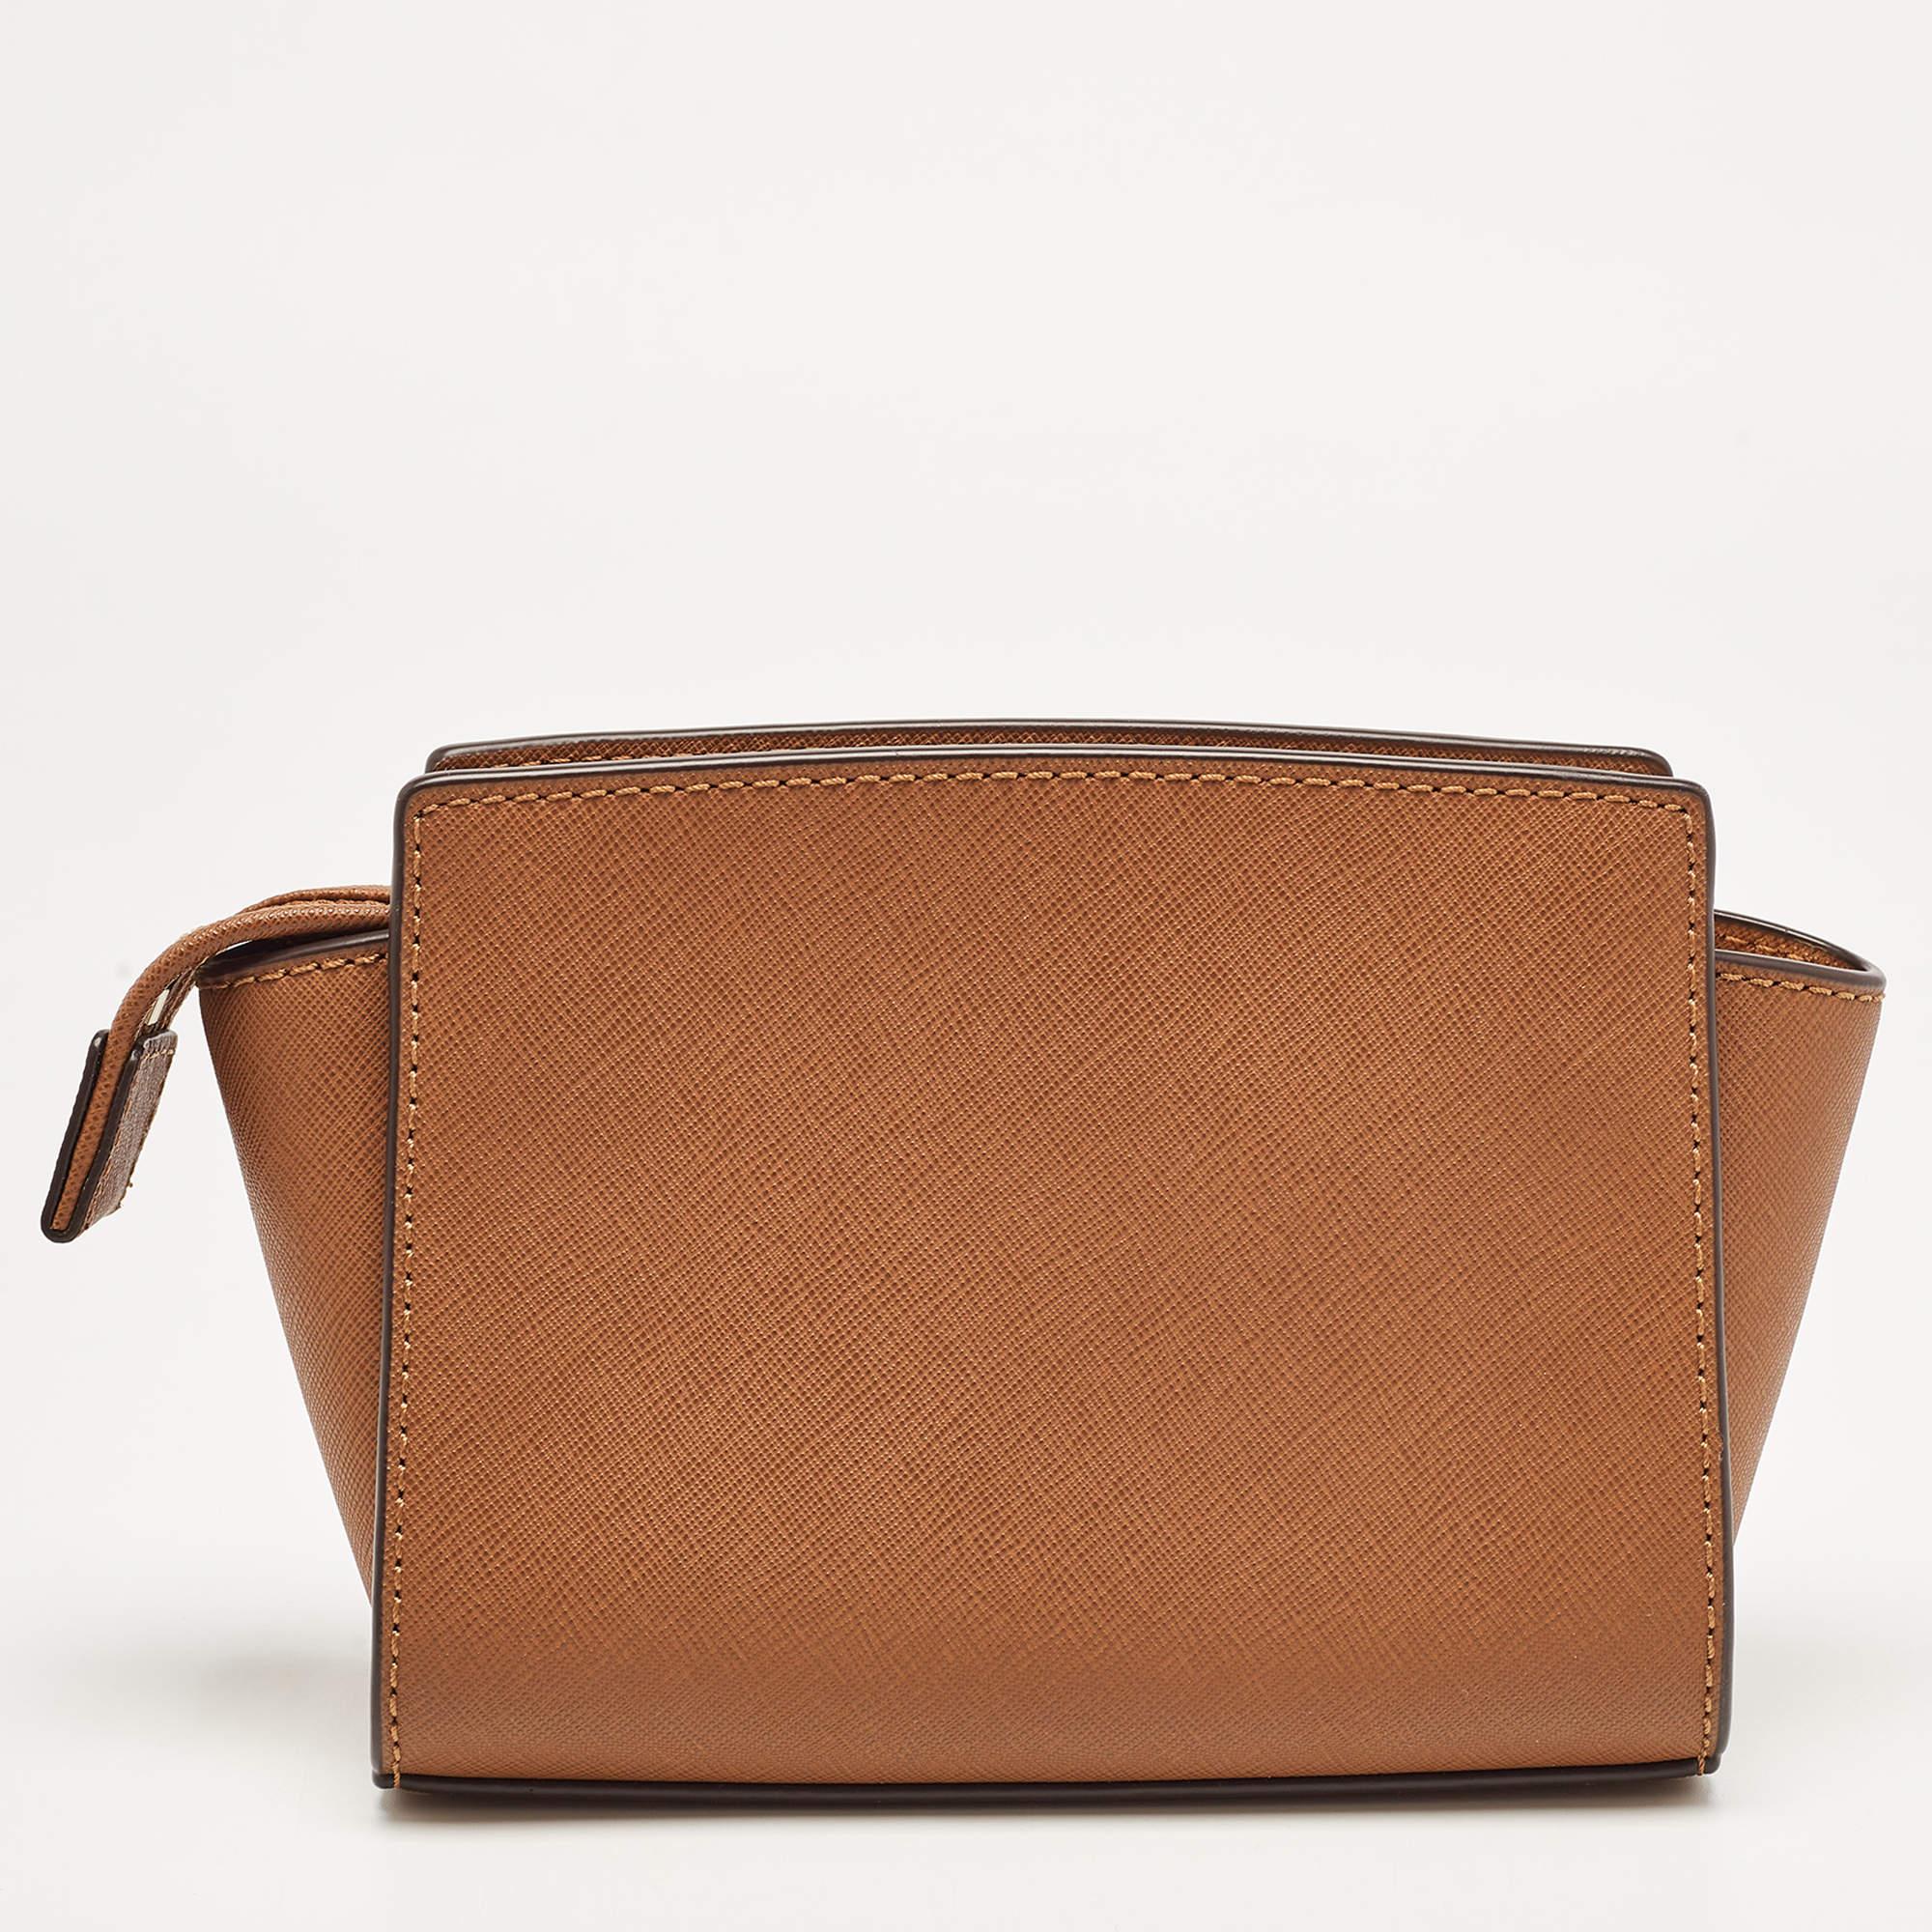 This mini Selma crossbody bag from Michael Kors is a stunning creation. It is designed using brown leather on the exterior and features a gold-toned logo accent on the front and a shoulder strap. It is equipped with a fabric-lined